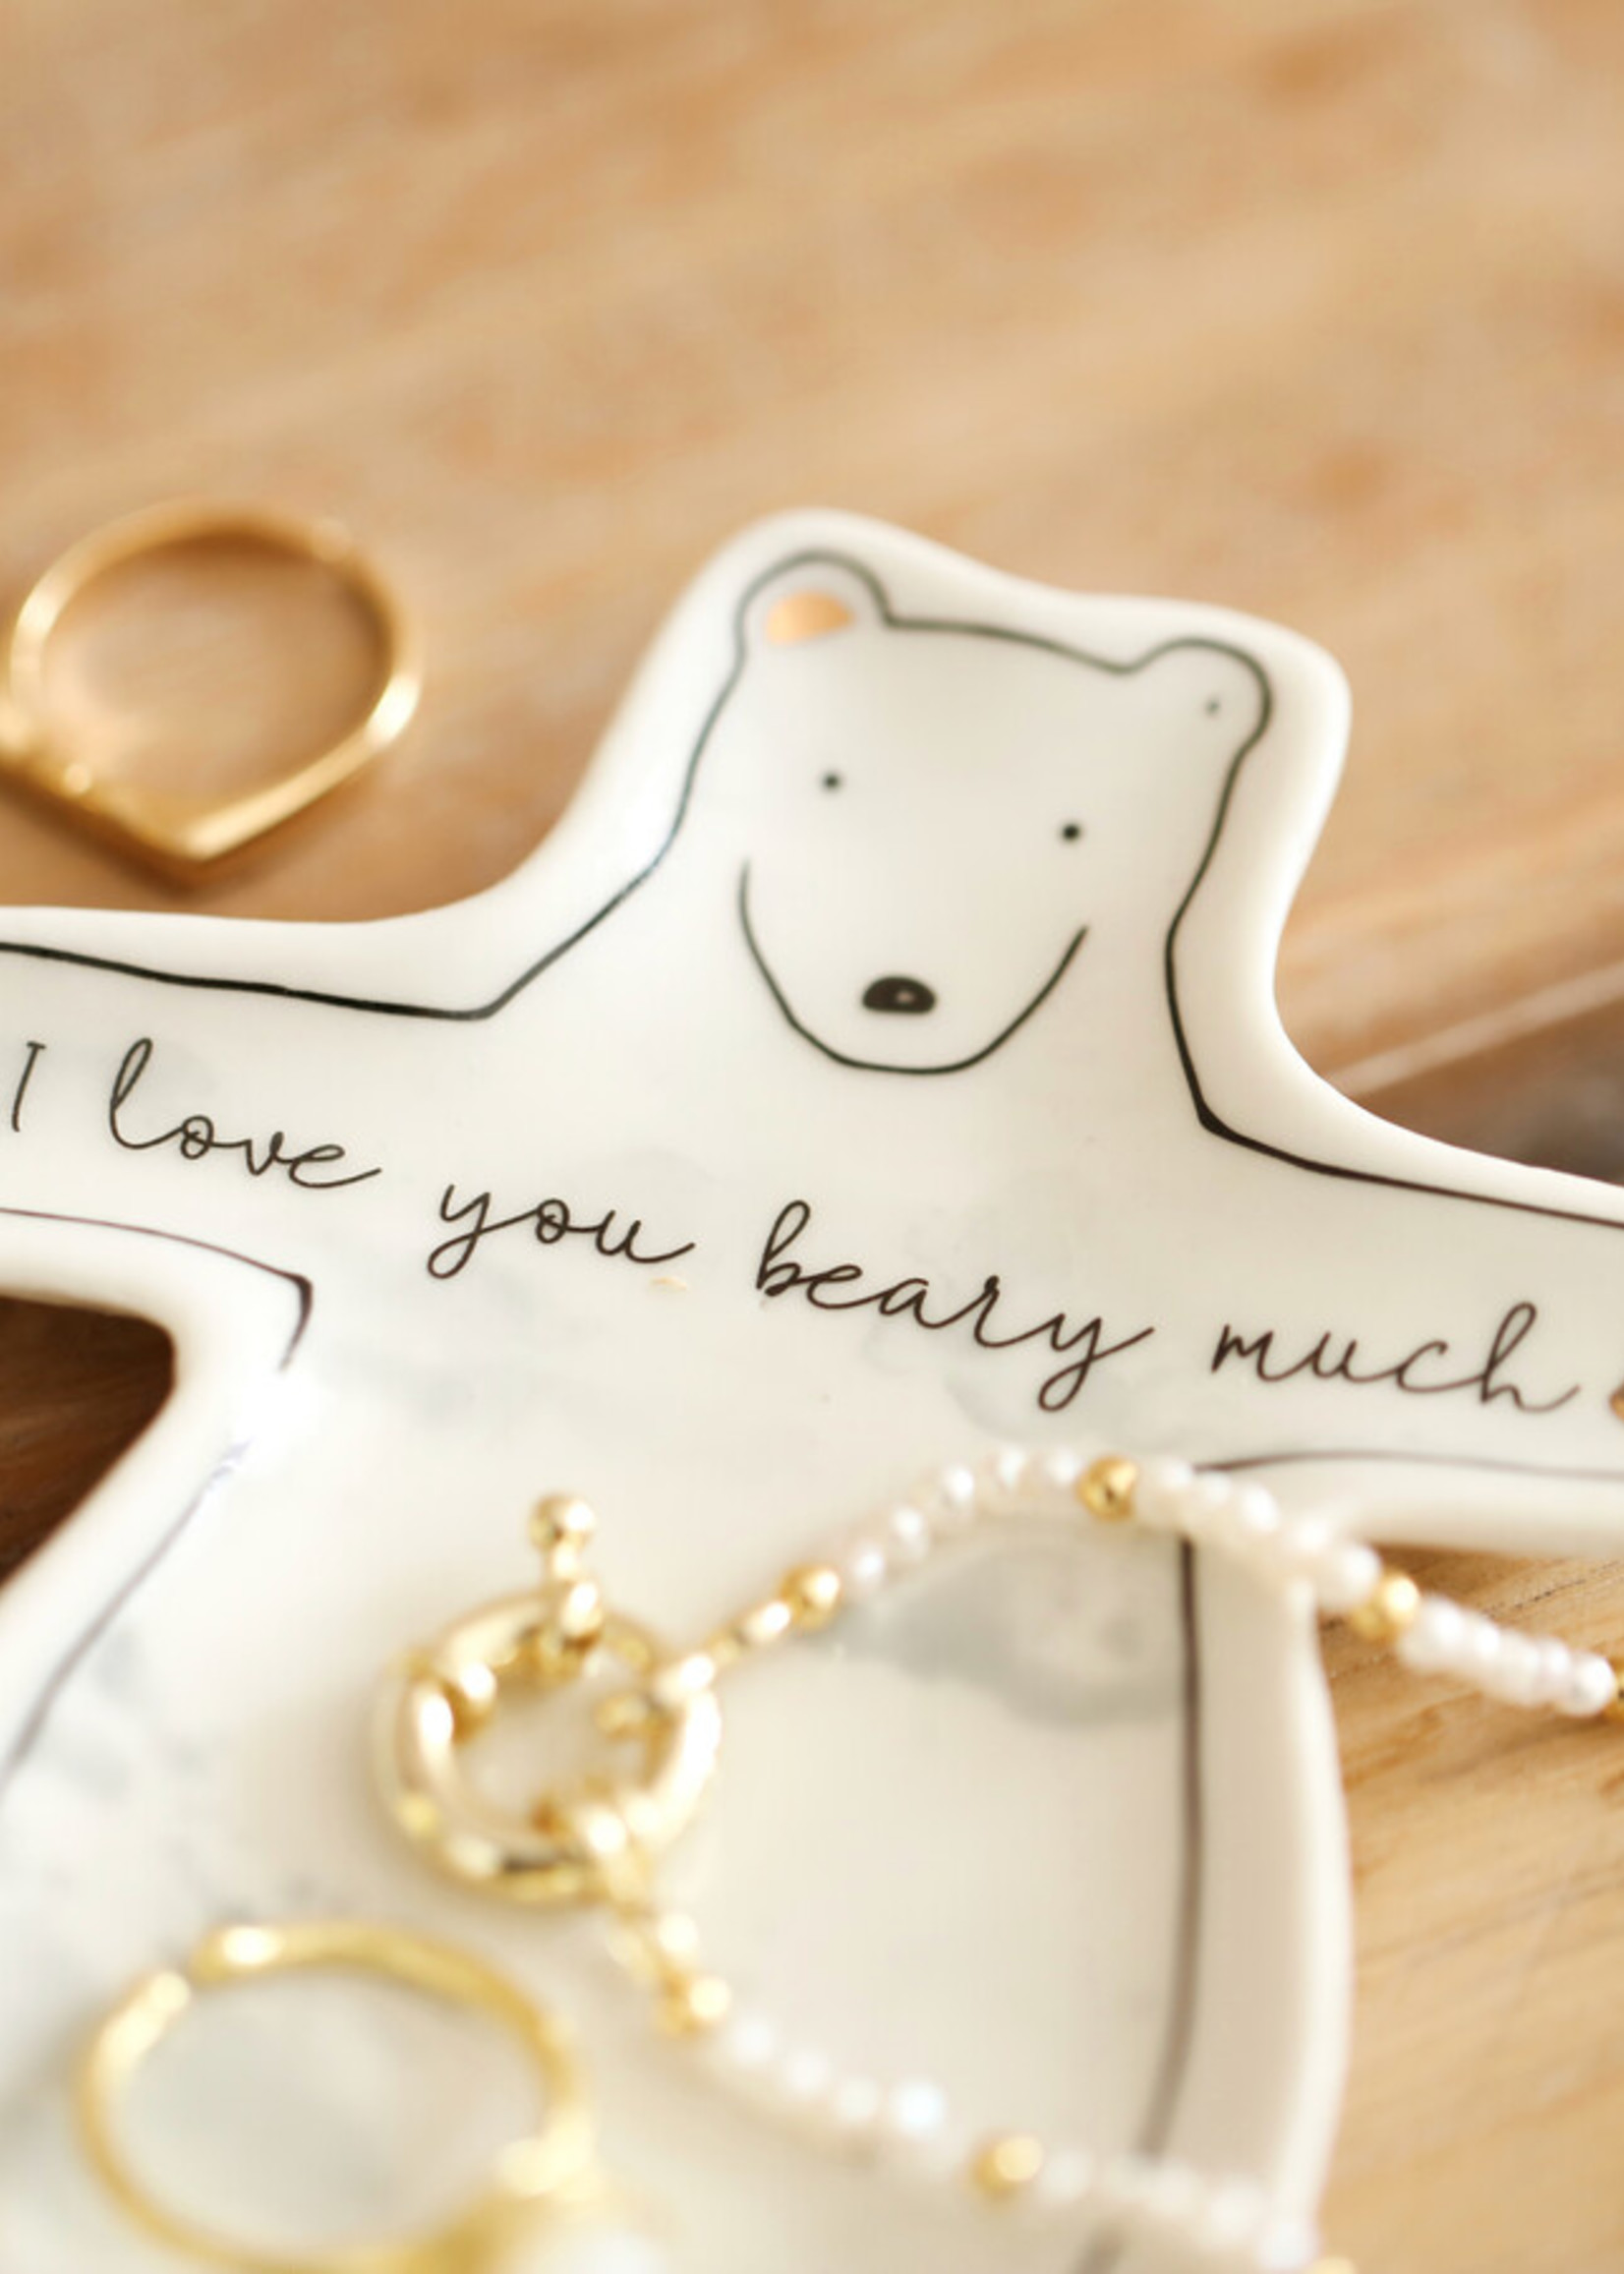 Lisa Angel Schoteltje BEER ‘I love you beary much’